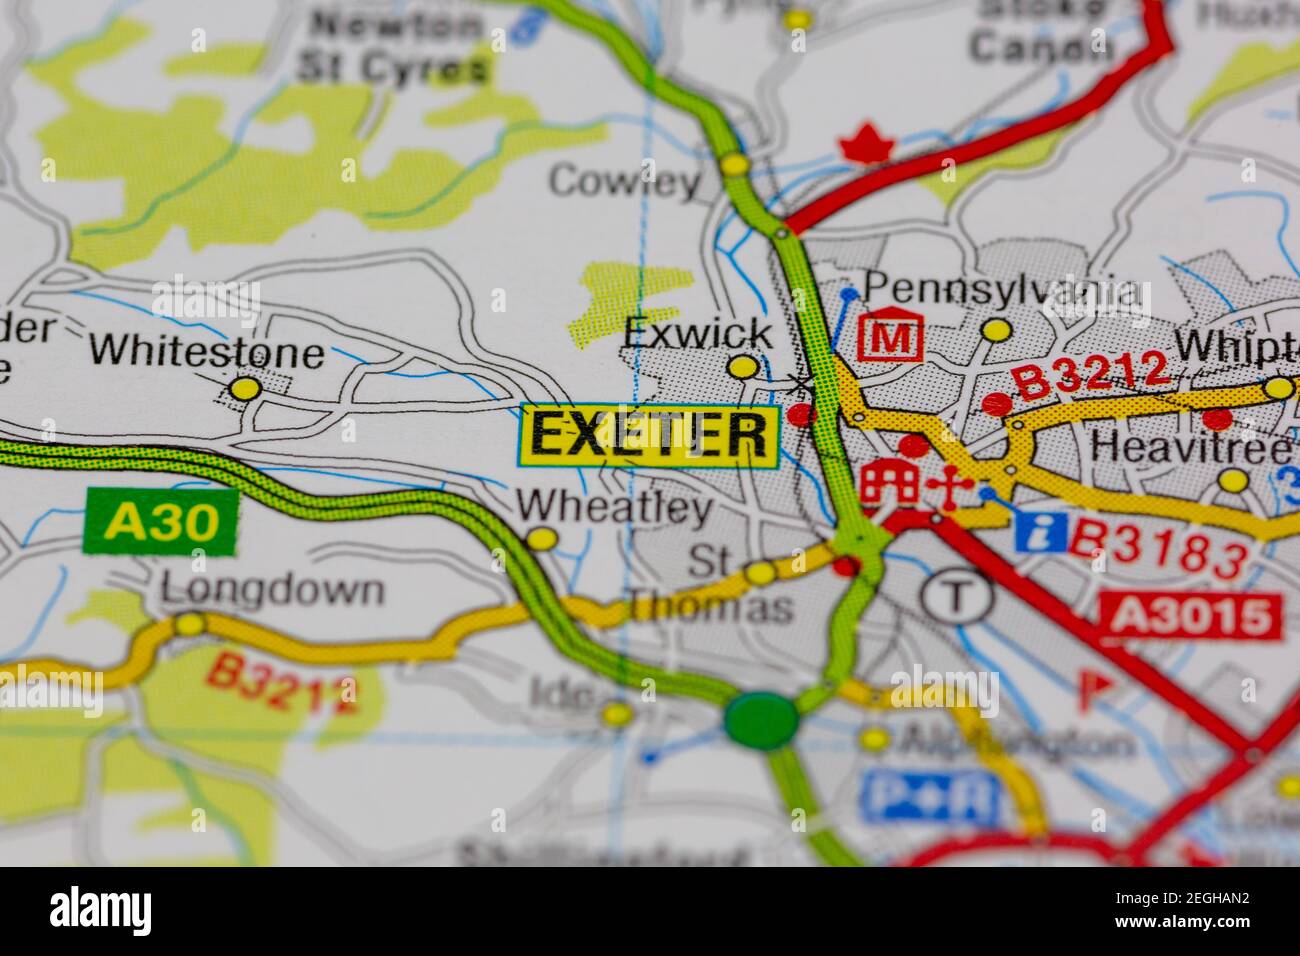 Exeter and surrounding areas shown on a road map or geography map Stock Photo